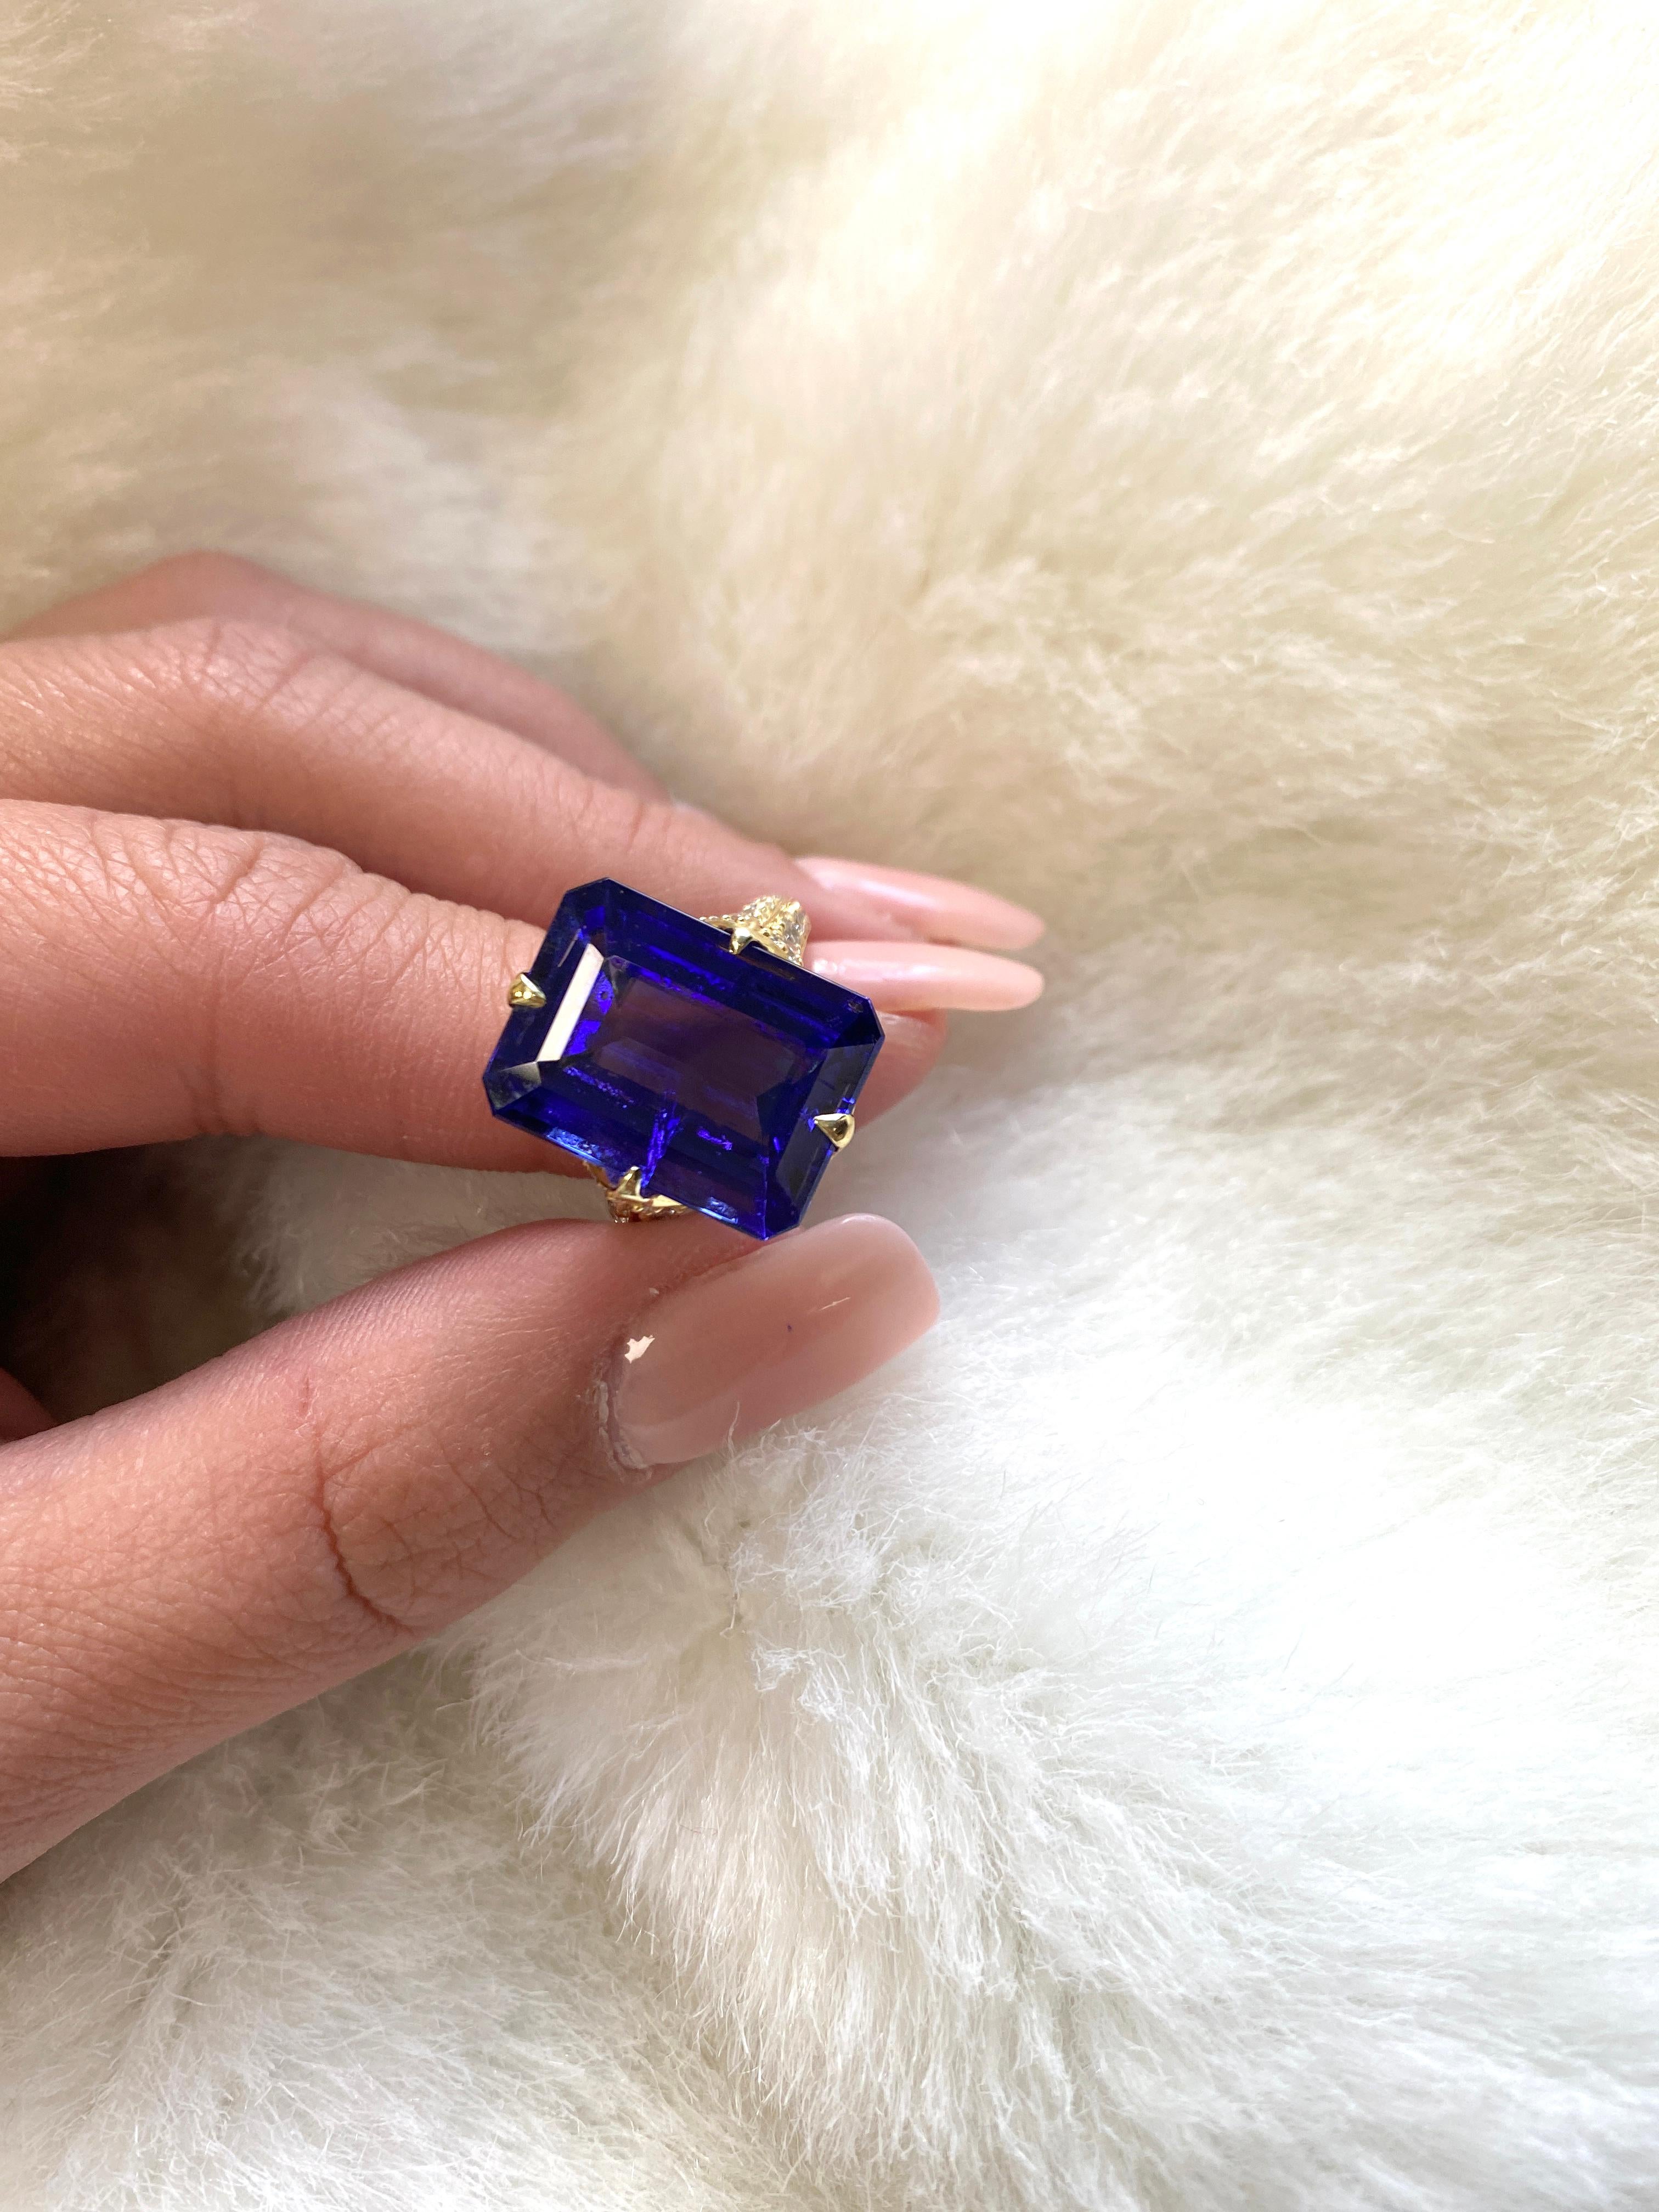 Stunning Tanzanite Emerald Cut Ring with Diamonds in 18K Yellow Gold, from ‘G-One' Collection. This is the perfect ring to make a statement. You will dazzle even more wearing it!

* Stone size: 16.80 x 12.80 mm
* Gemstone: 100% Earth Mined 
*